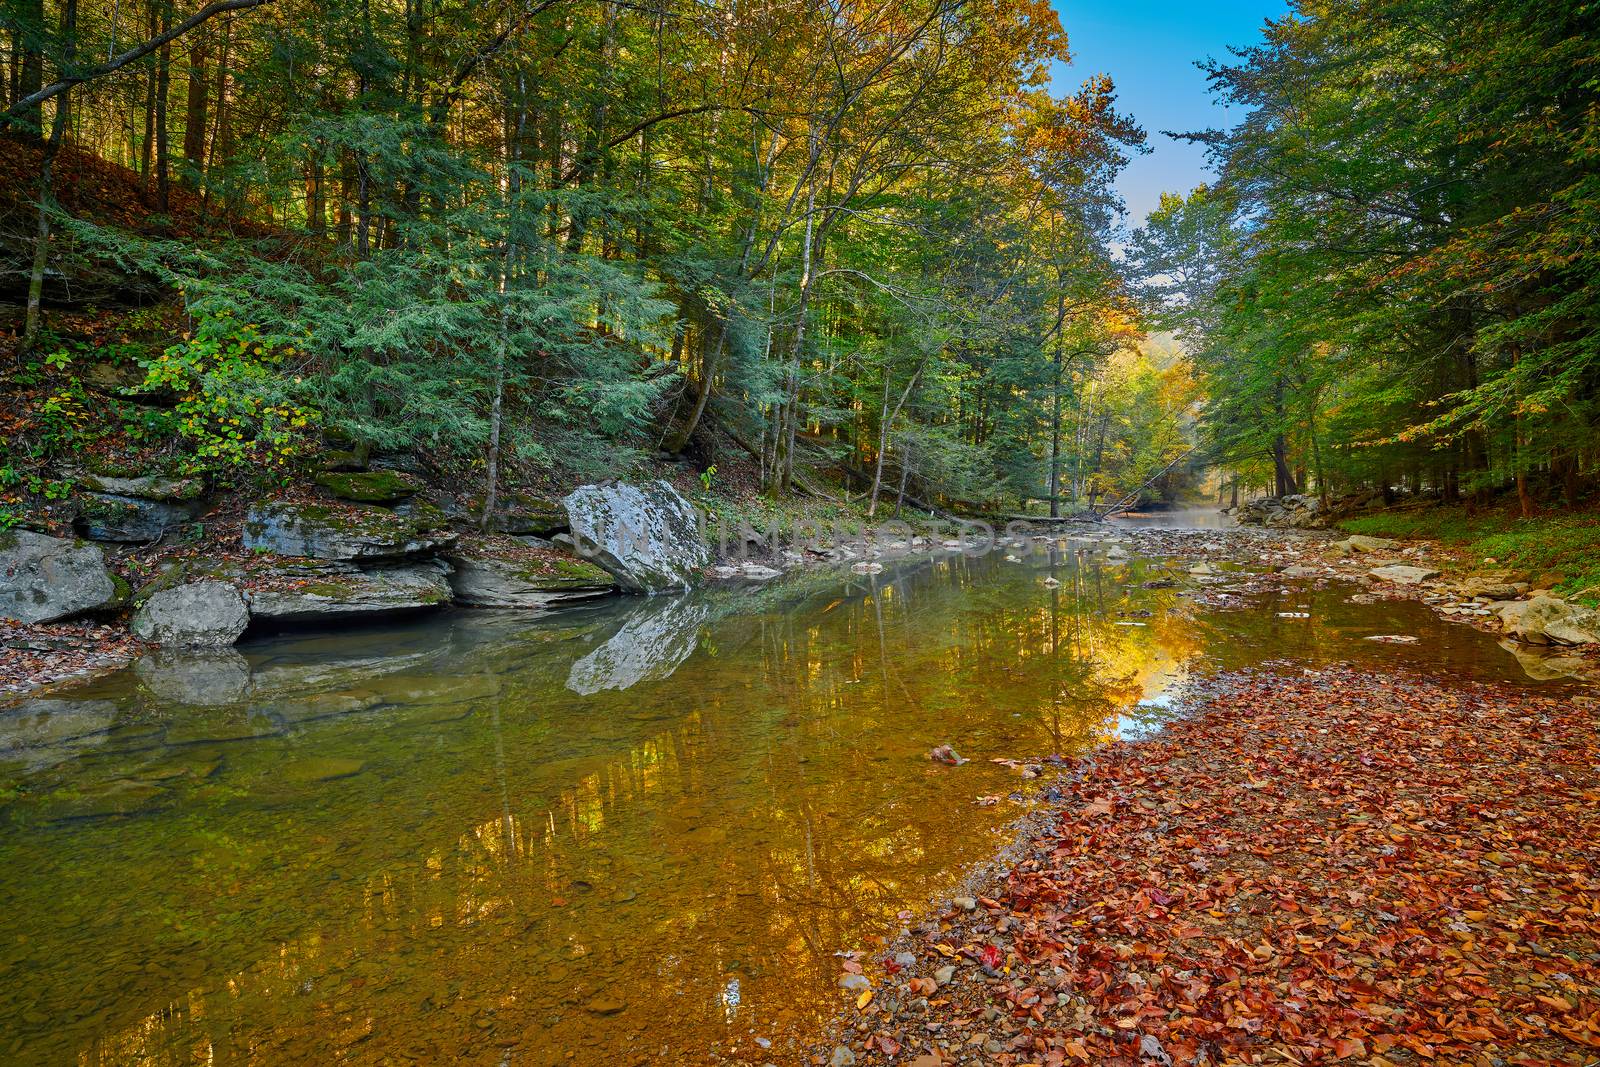 War Creek next to Turkey Foot Campground in the Daniel Boone National Forest near McKee, KY.